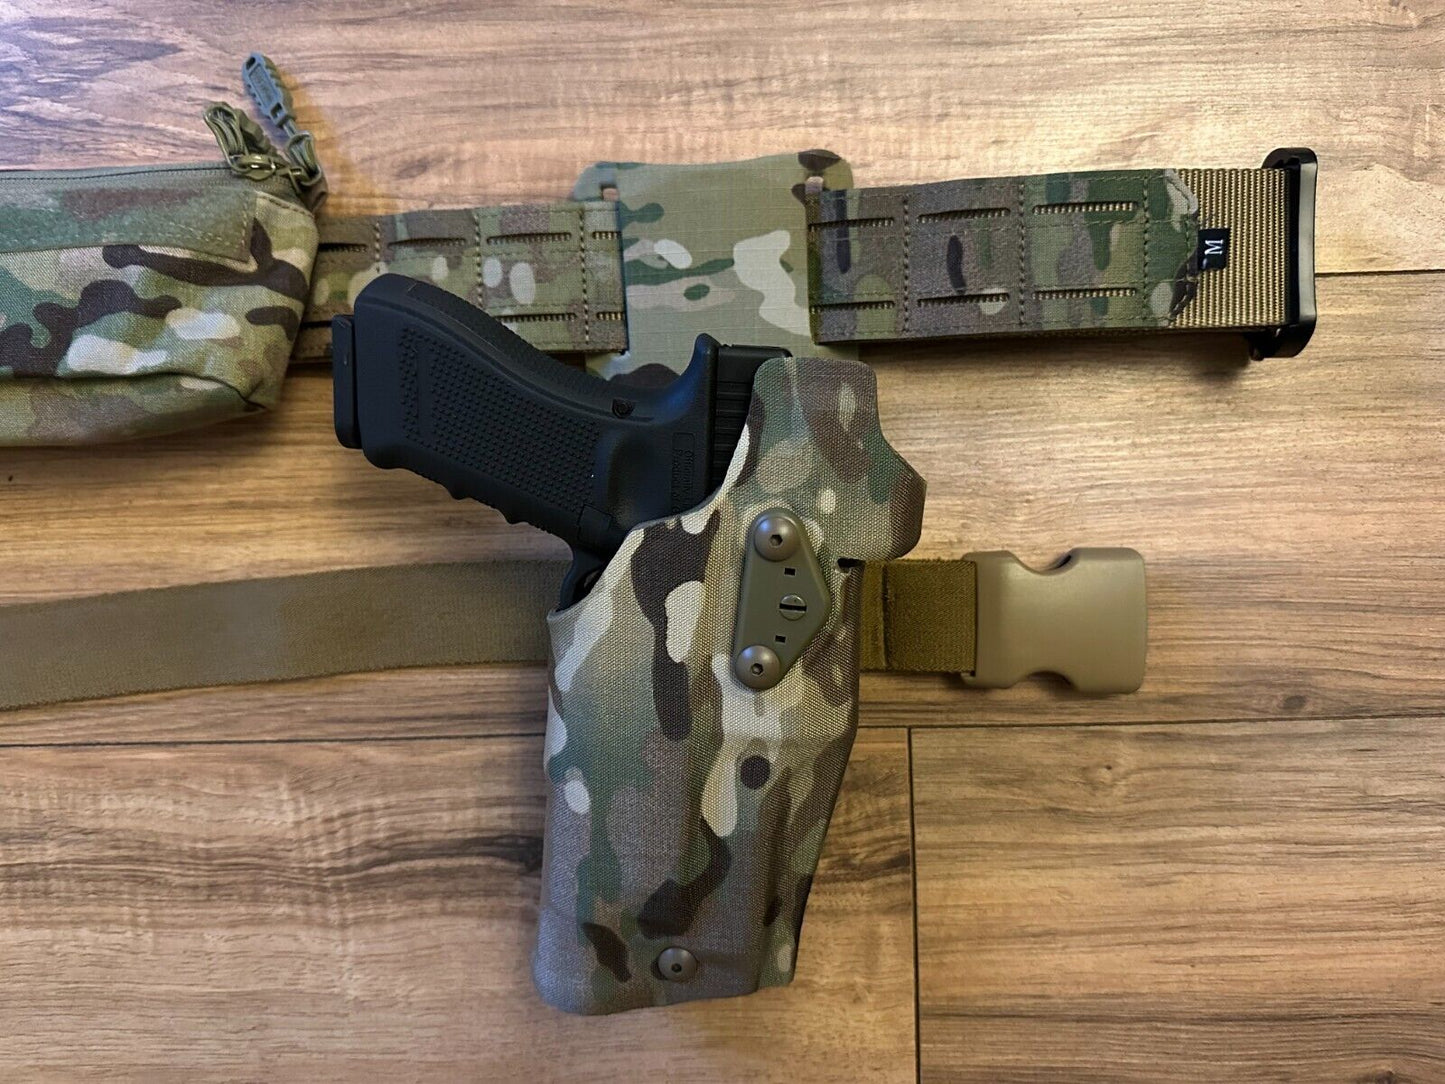 Shooters Belt Multicam + Airsoft Glock 17 holster BFG style MOLLE Wais ...